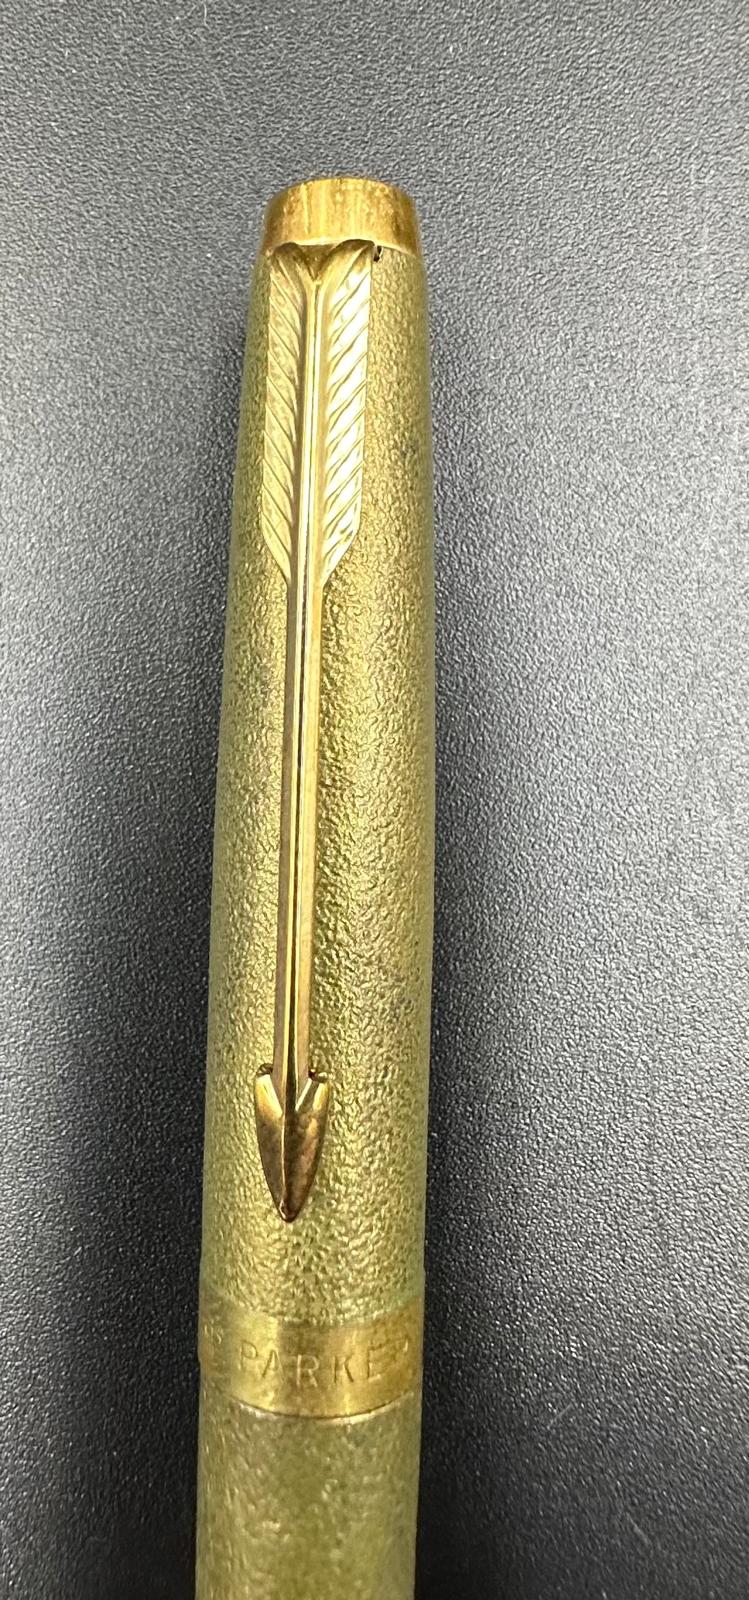 A boxed limited edition R M S Queen Elizabeth Parker fountain pen 2089/5000 - Image 2 of 5